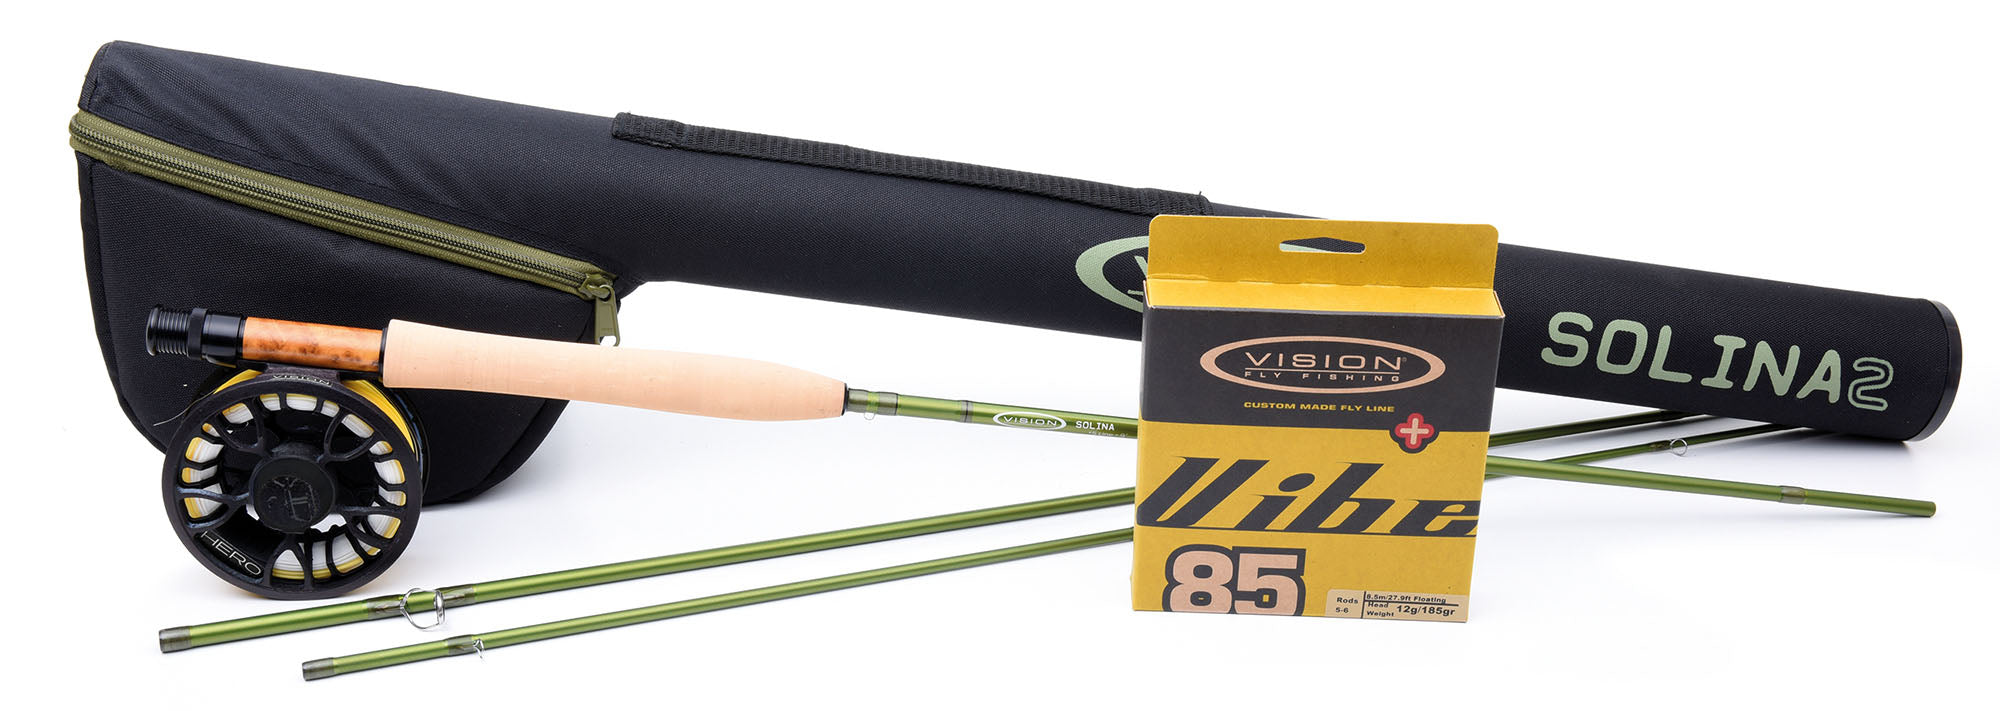 SOLINA2 Fly Rod Outfit ¥ – Nile Creek Fly Shop